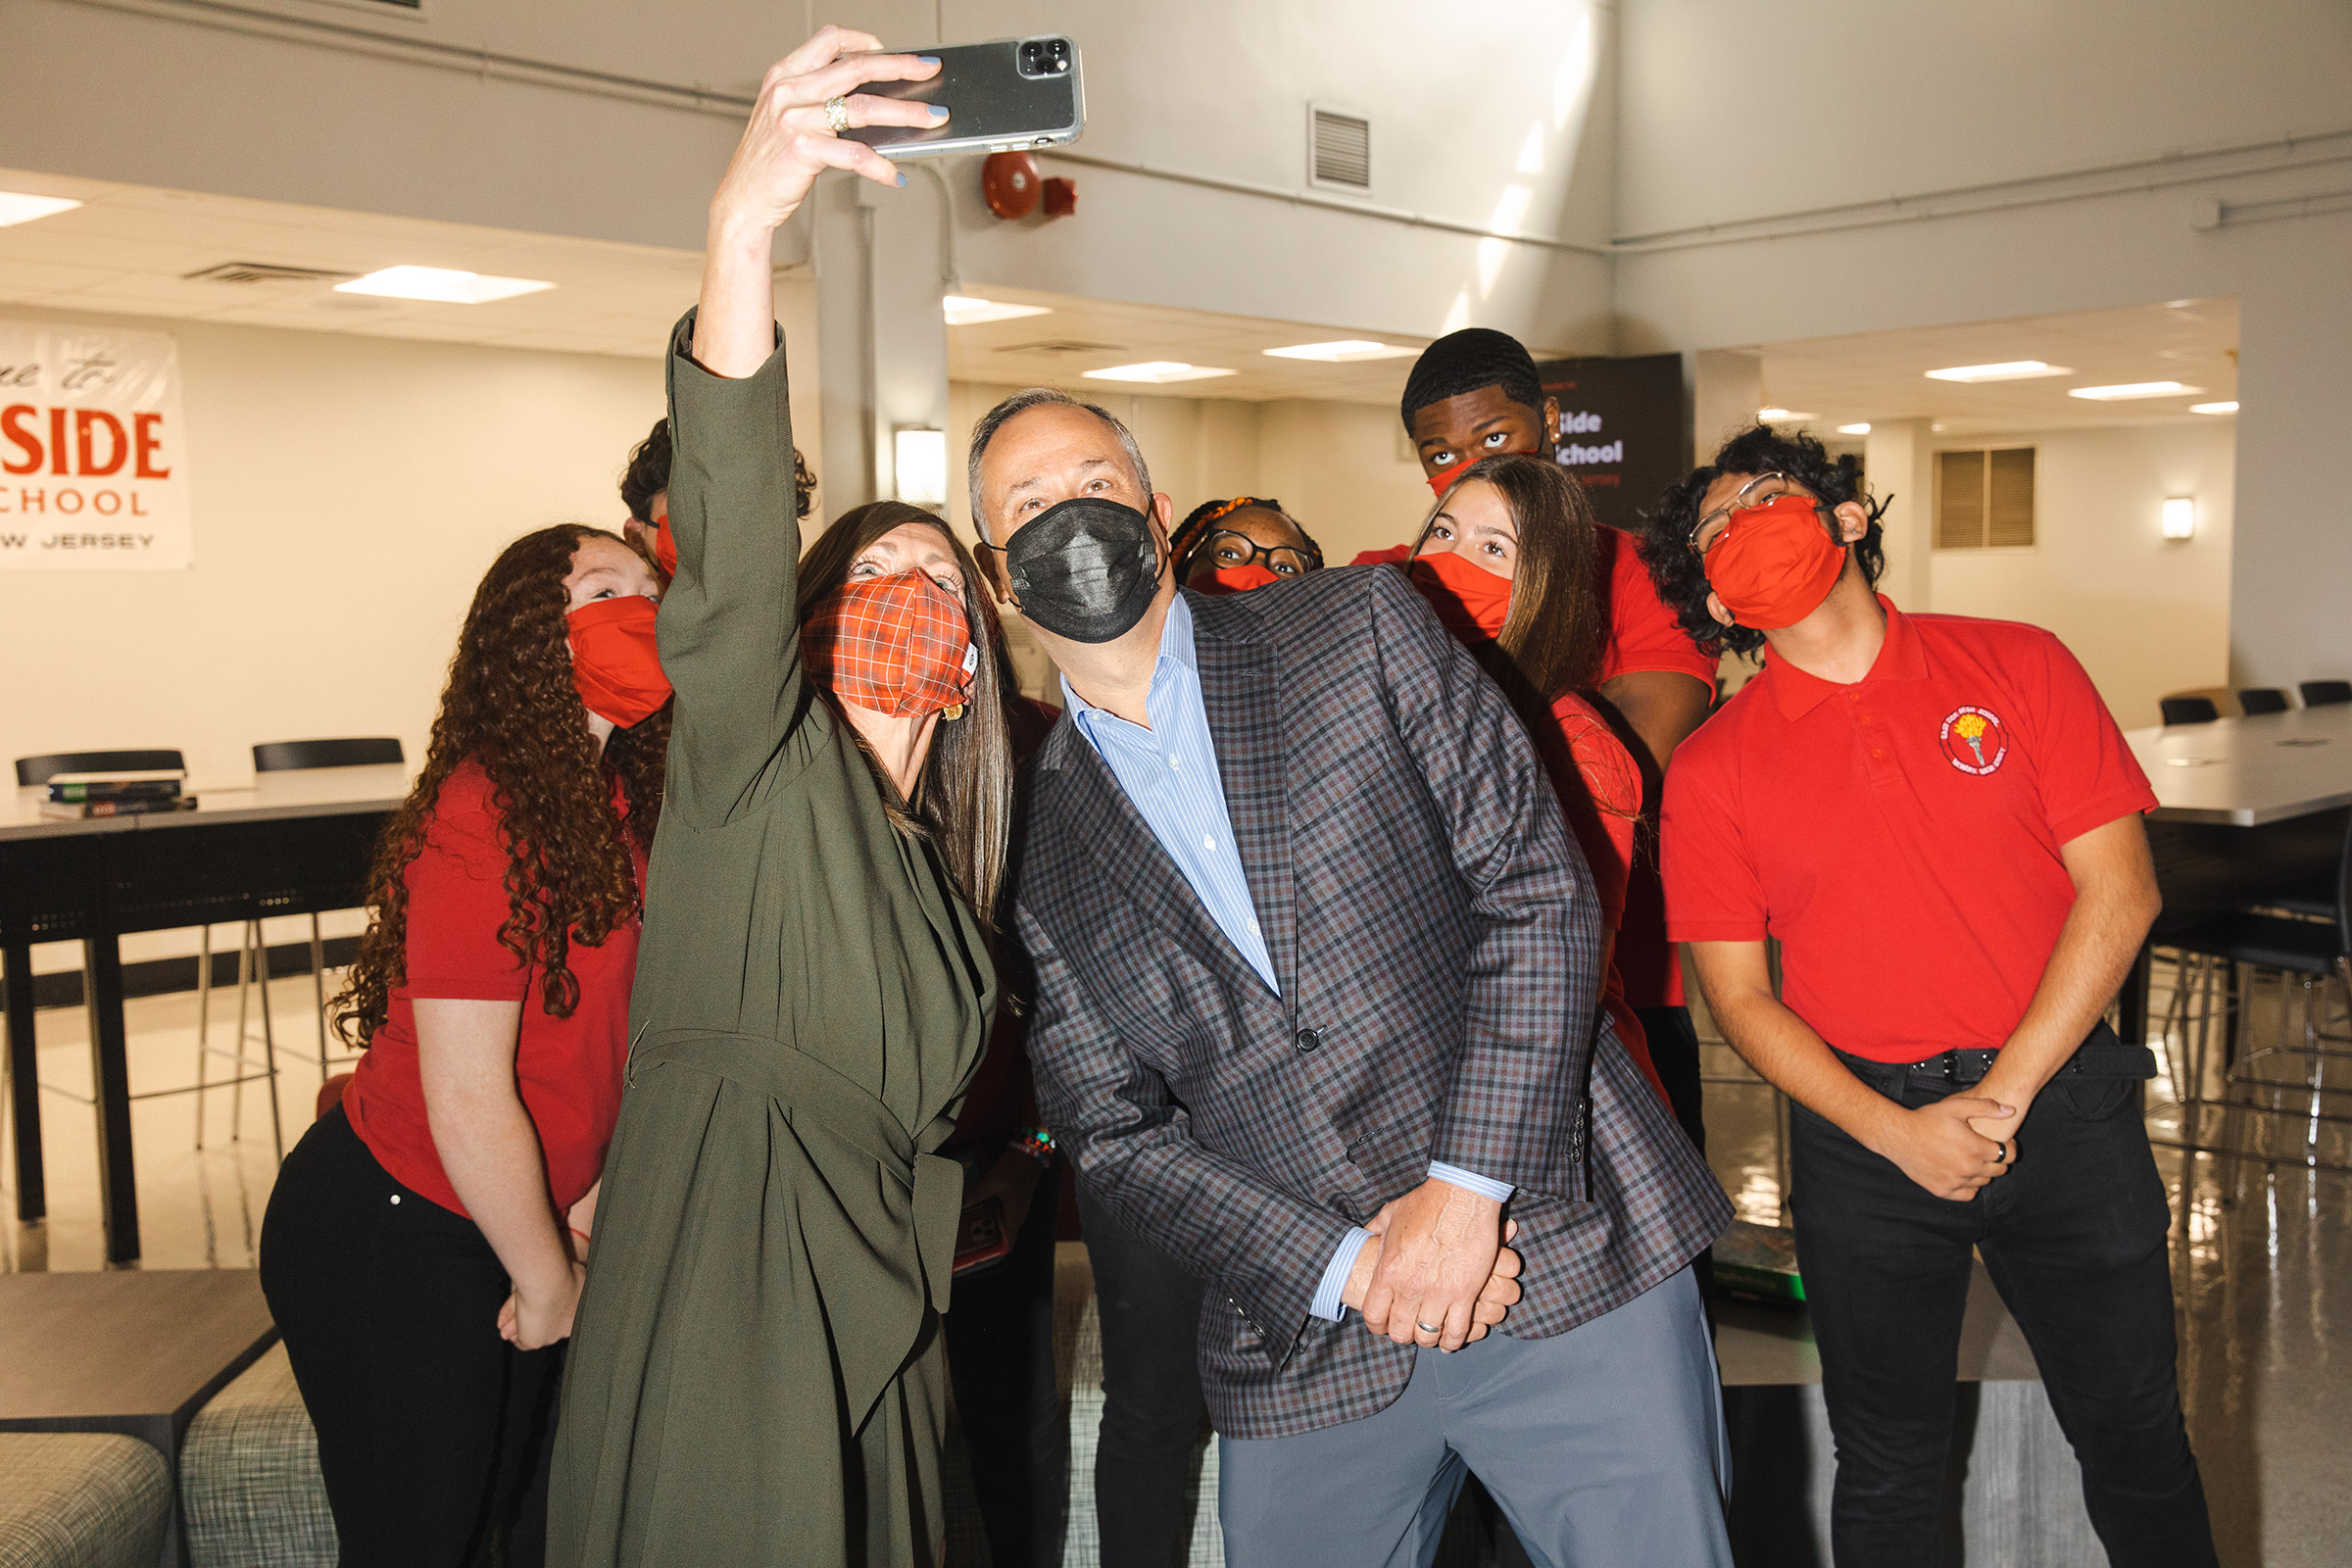 OCT 19 - NEWARK, NJ: Scenes from East Side High School with First Gentleman Doug Emhoff, including the first lady of New Jersey, Tammy Murphy (wife of the Governor) on Tuesday, October 19, 2021, in Newark, New Jersey. Taking a selfie with Tammy Murphy and students. (Photo by Landon Nordeman)